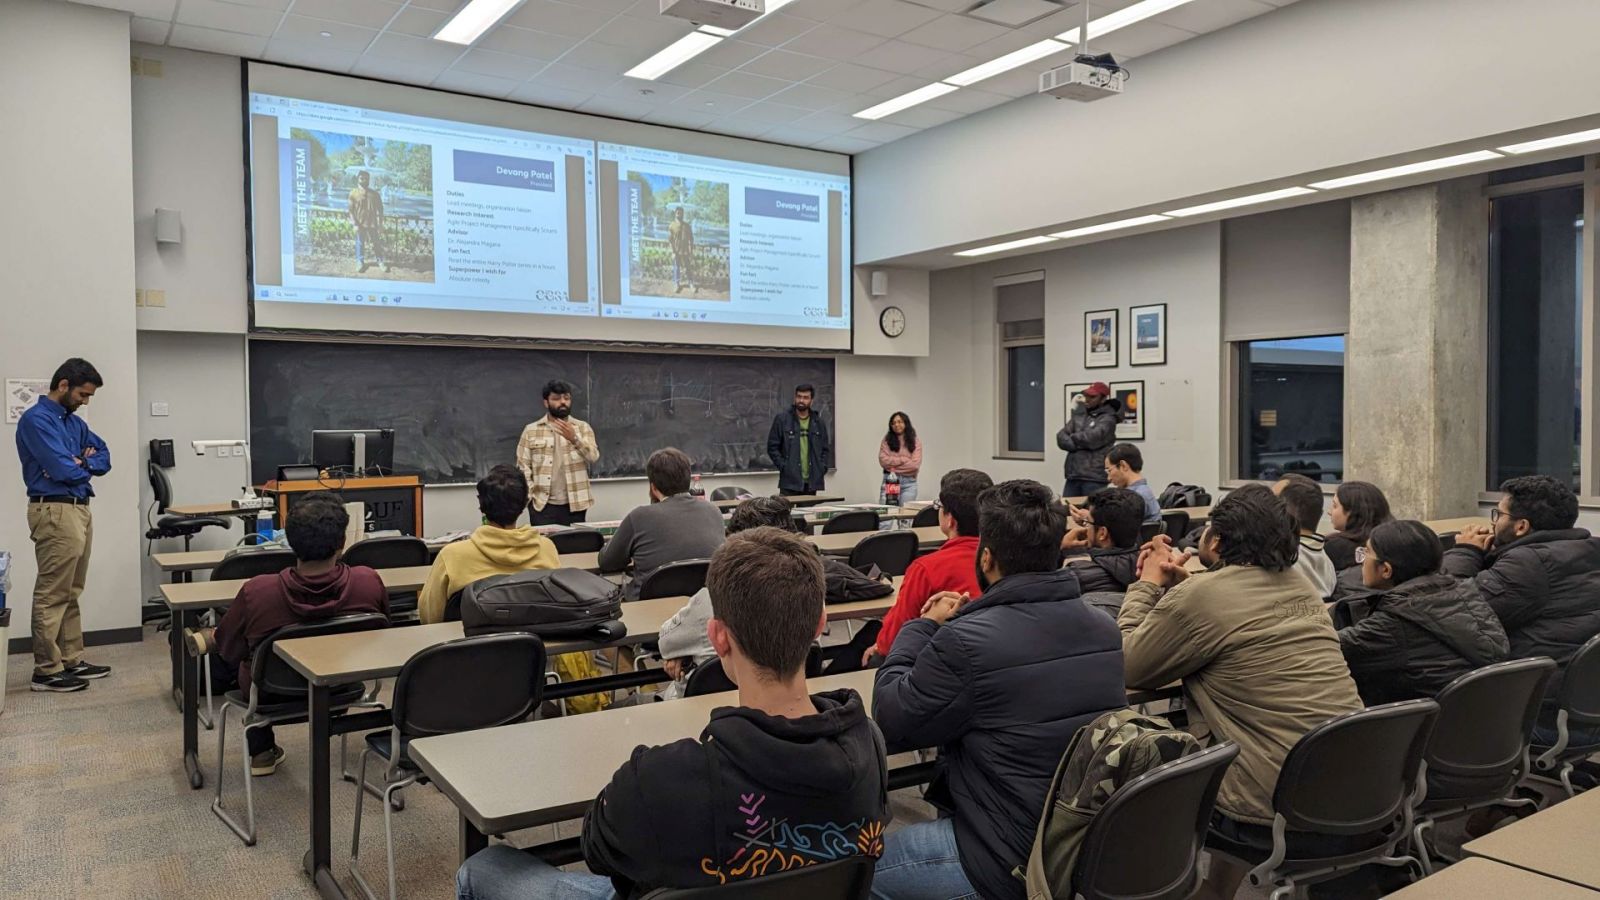 The first meeting of the CIT Graduate Student Association (CGSA), with the organization's first president, Devang Patel, speaking at front. (Photo provided)